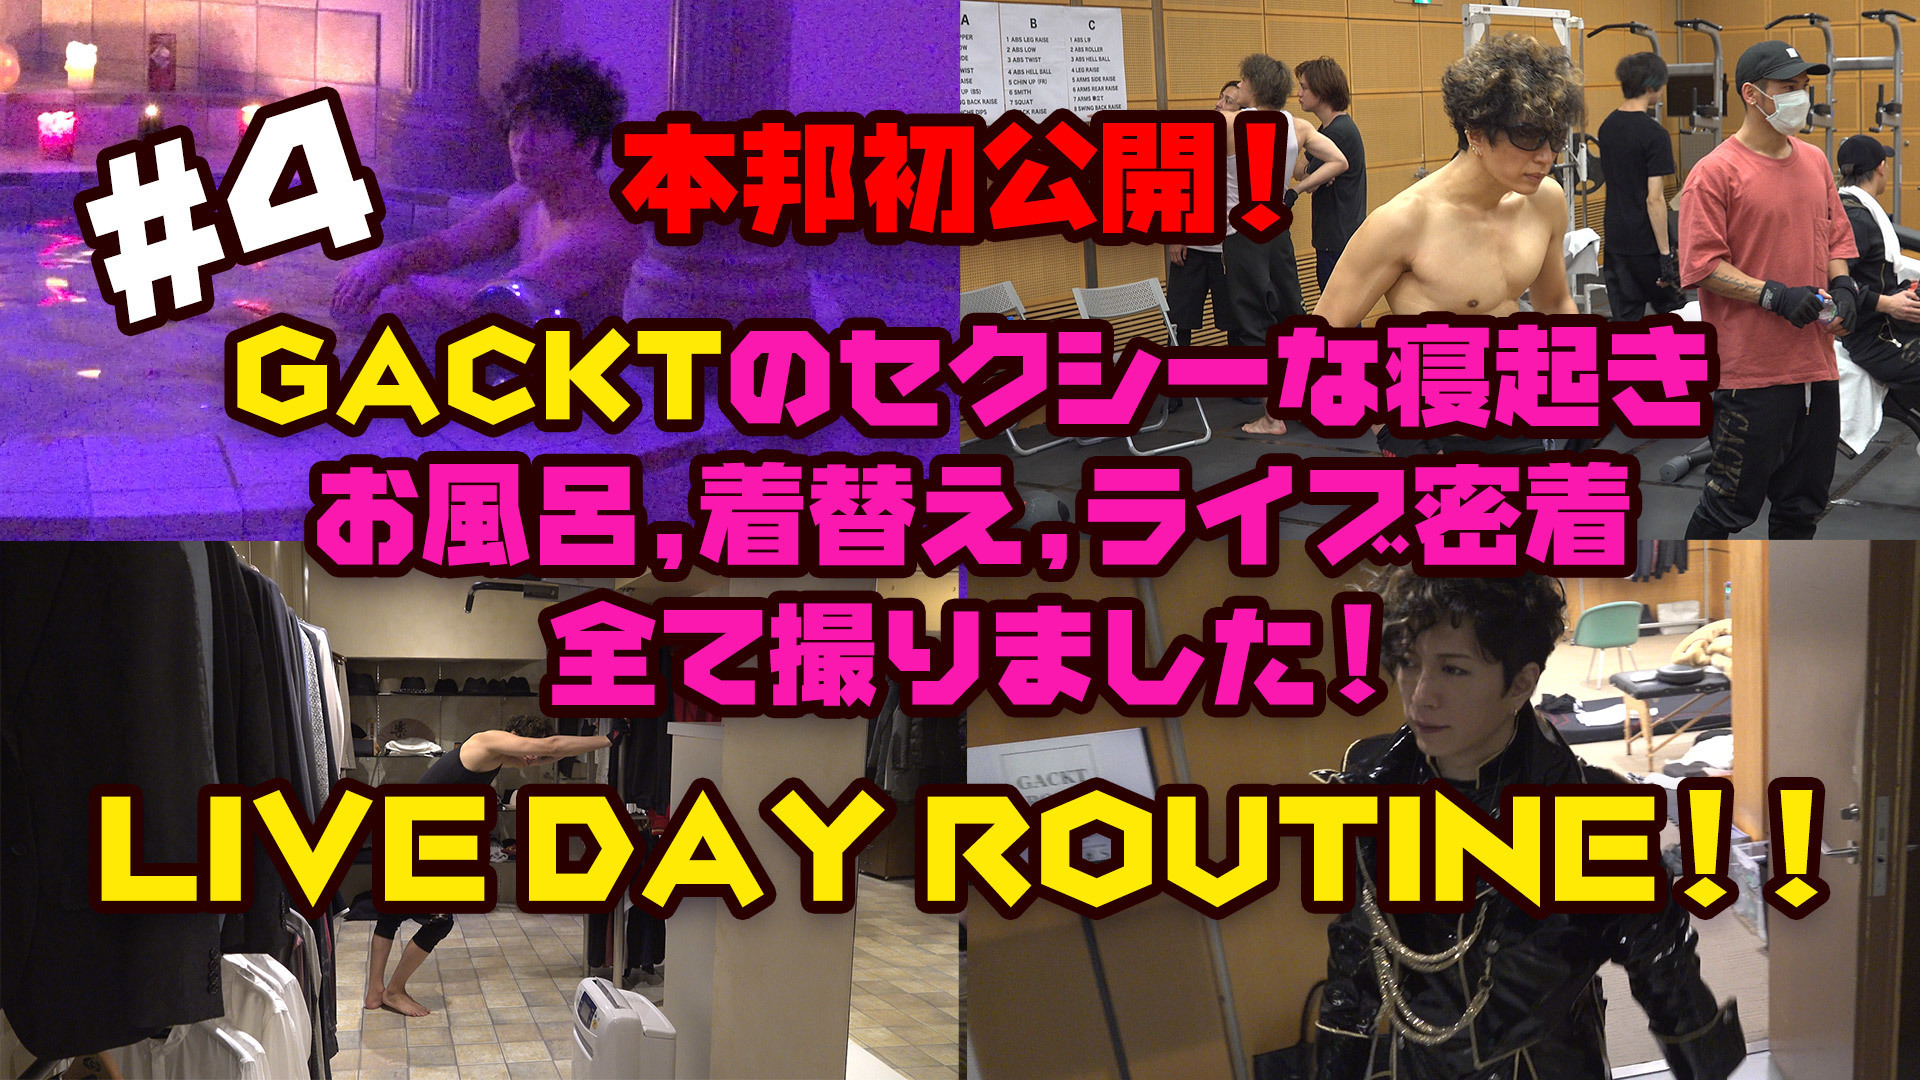 GACKT OFFICIAL YOUTUBE『がくちゃん』#4 配信開始！ | GACKT OFFICIAL WEBSITE